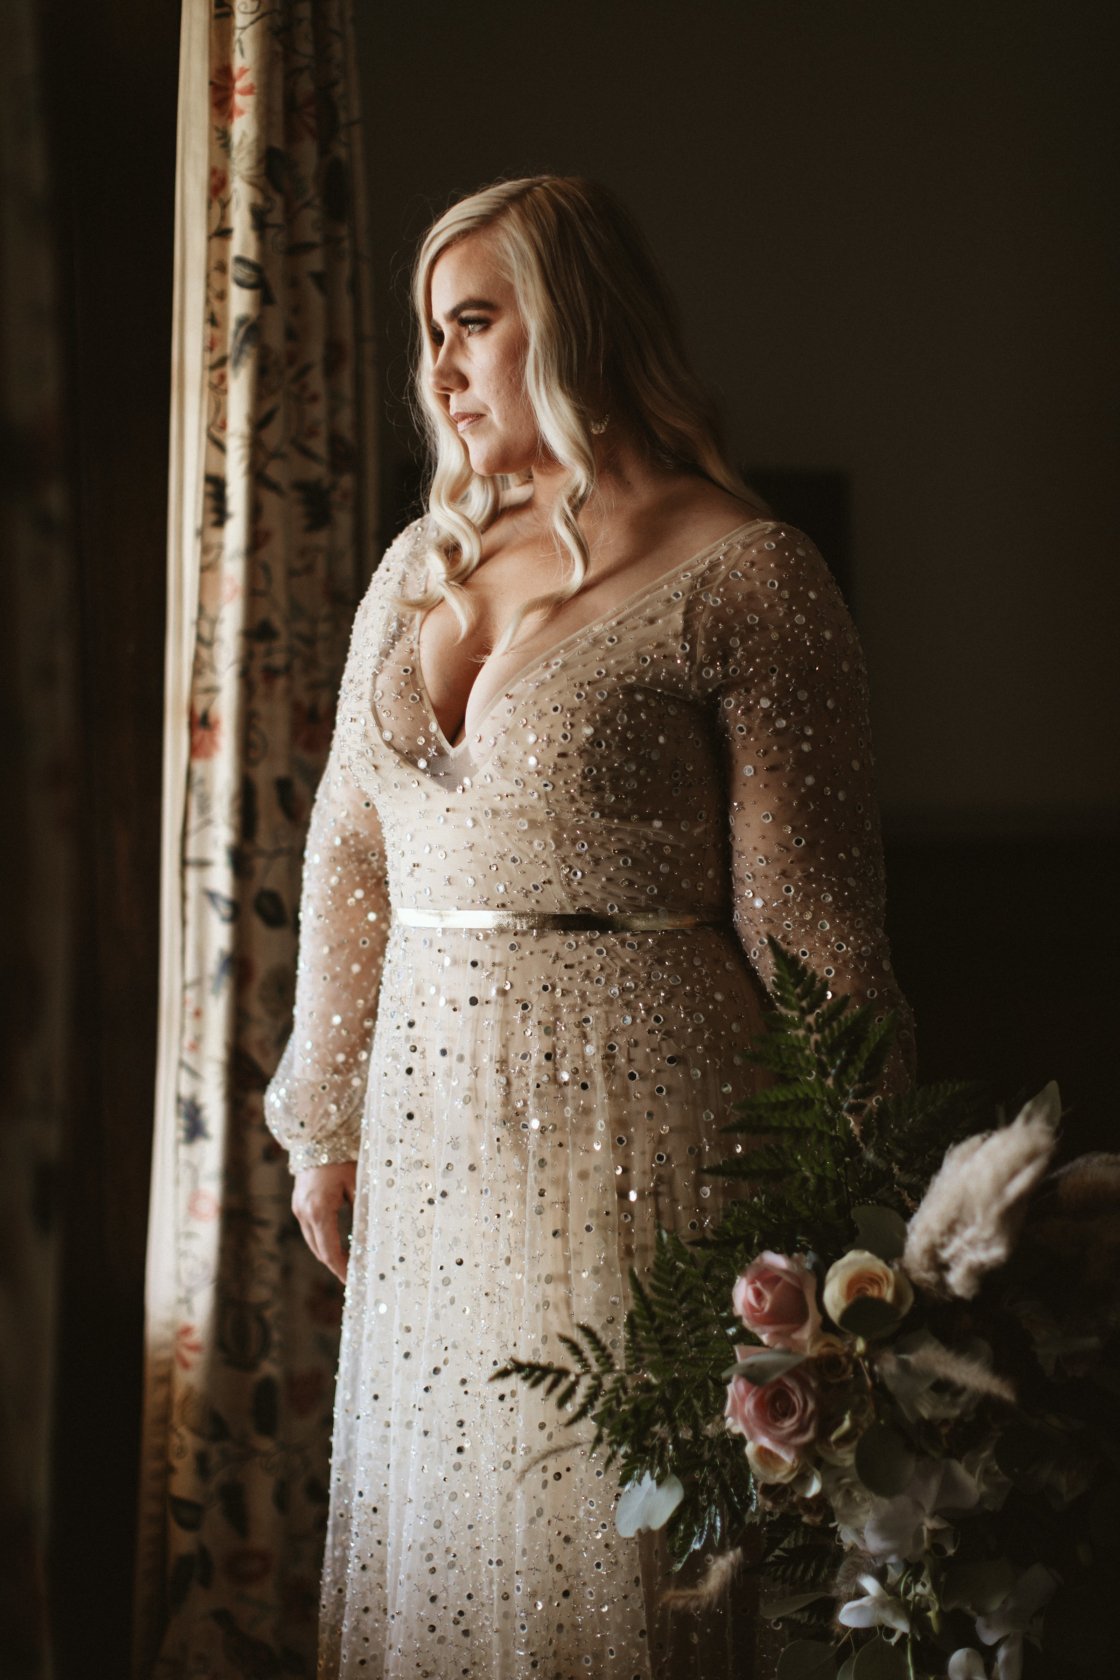 How to choose a wedding dress for a plus size bride?